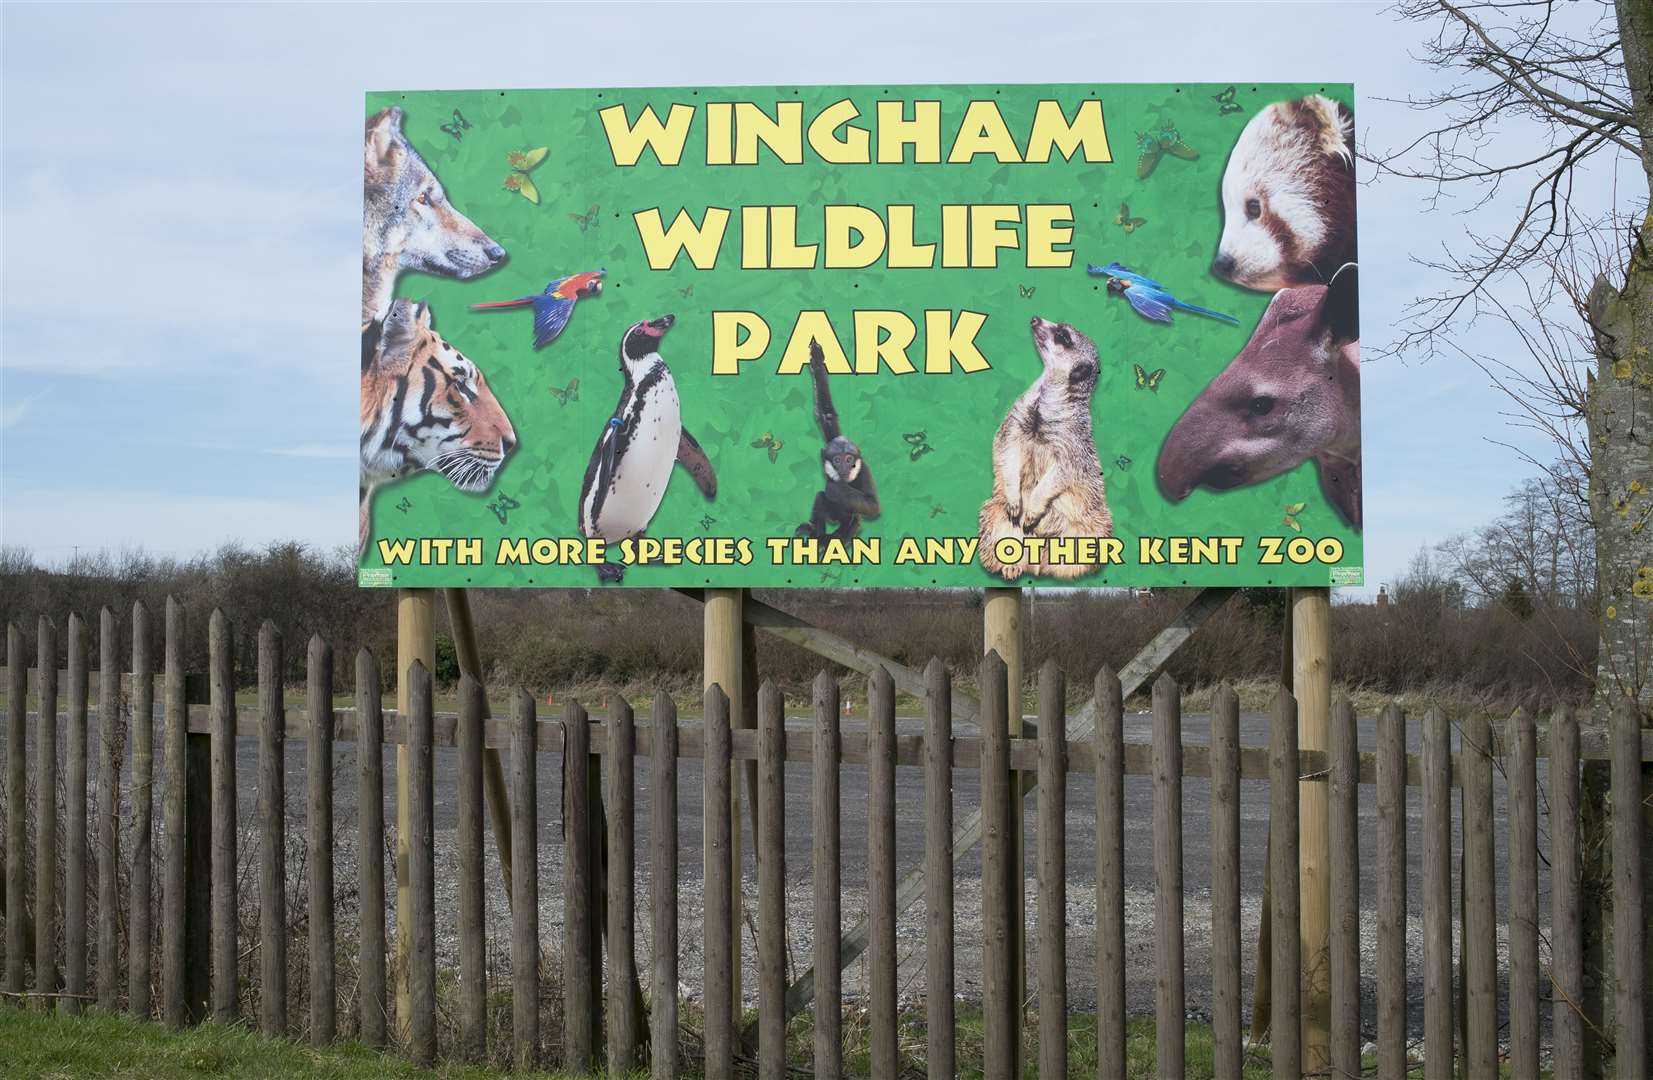 Wingham Wildlife Park, near Canterbury, is hugely popular with families